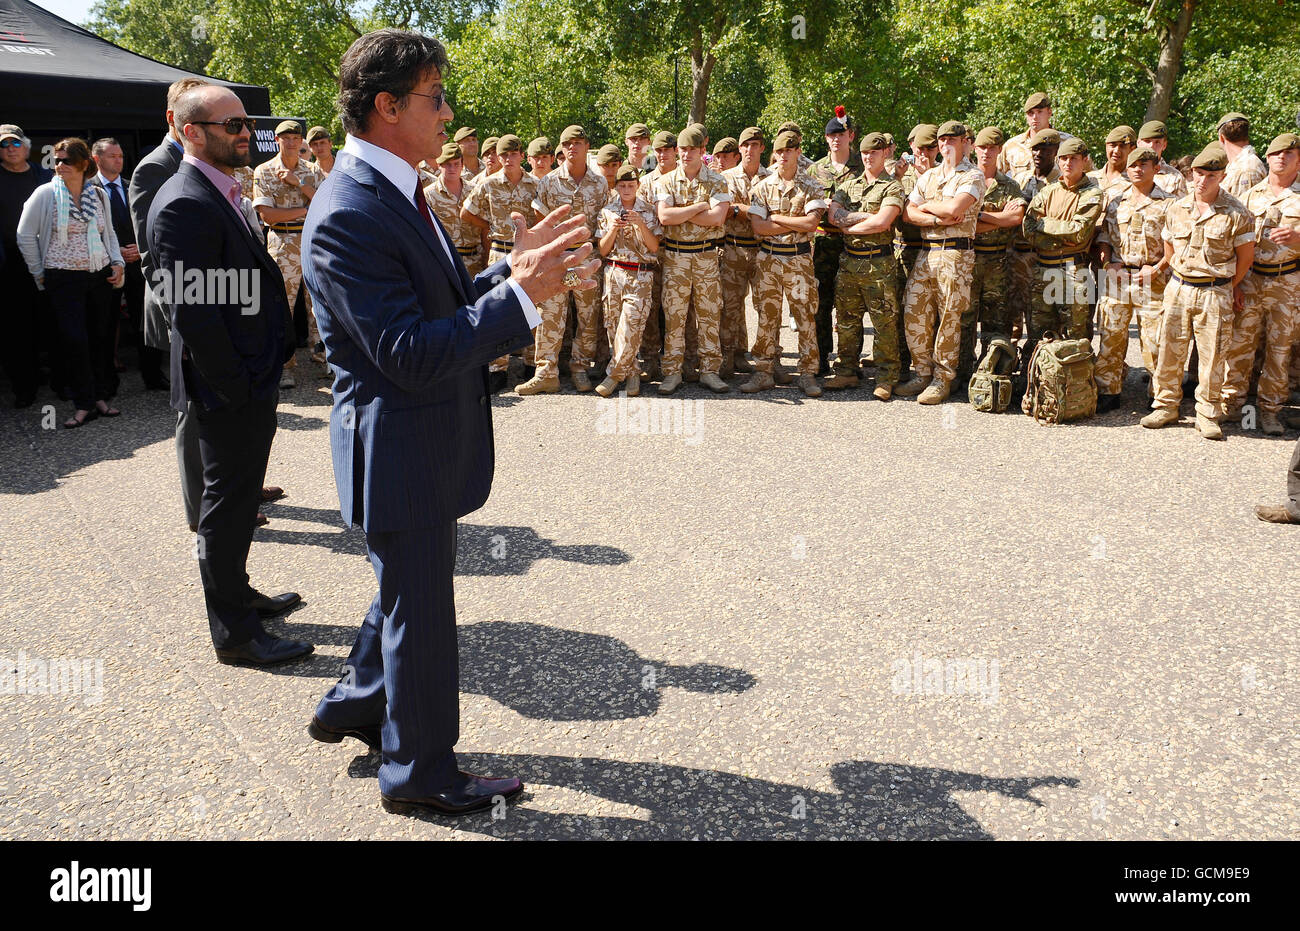 Sylvester Stallone (front), Jason Statham (centre) and Dolph Lundgren meet troops from the Princess of Wales Royal Regiment, at the Wellington Barracks in London before tonight's premiere of The Expendables. Stock Photo